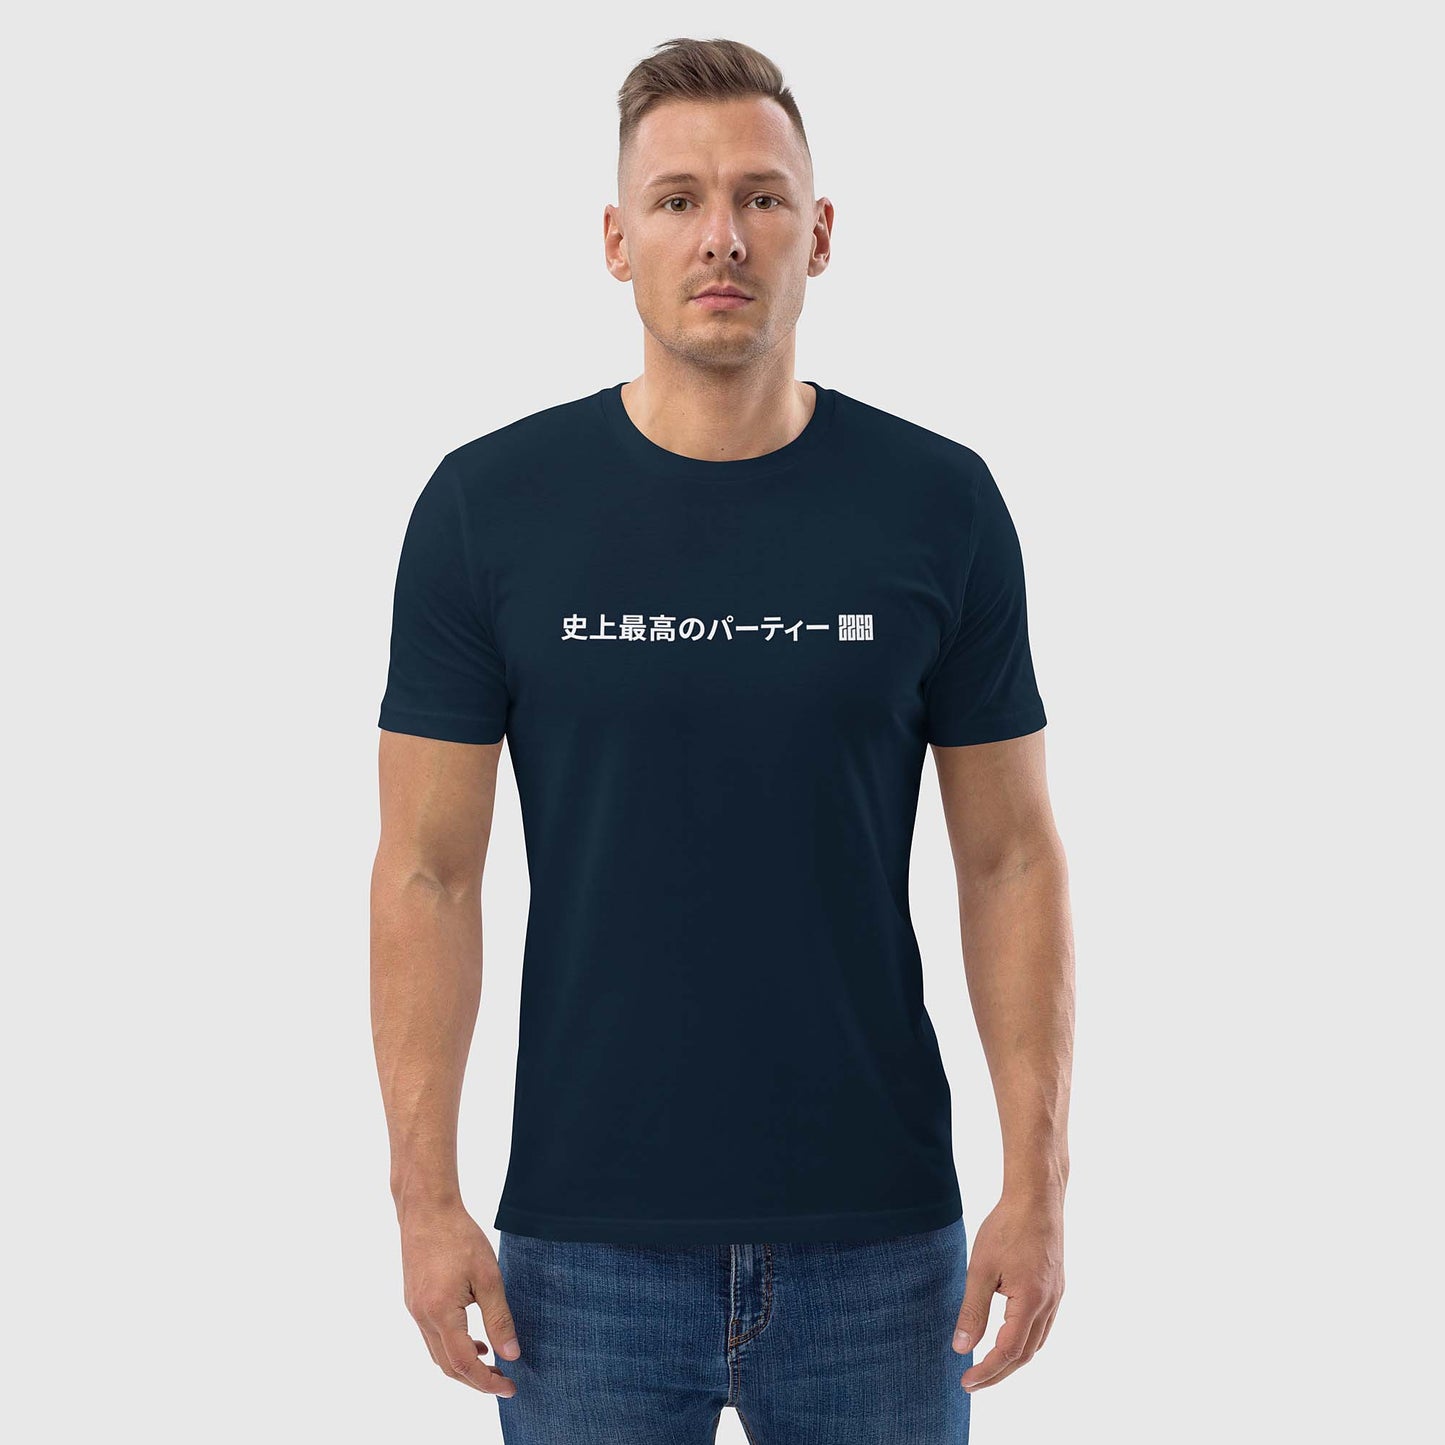 Unisex navy organic cotton t-shirt with Japanese 2269 party message